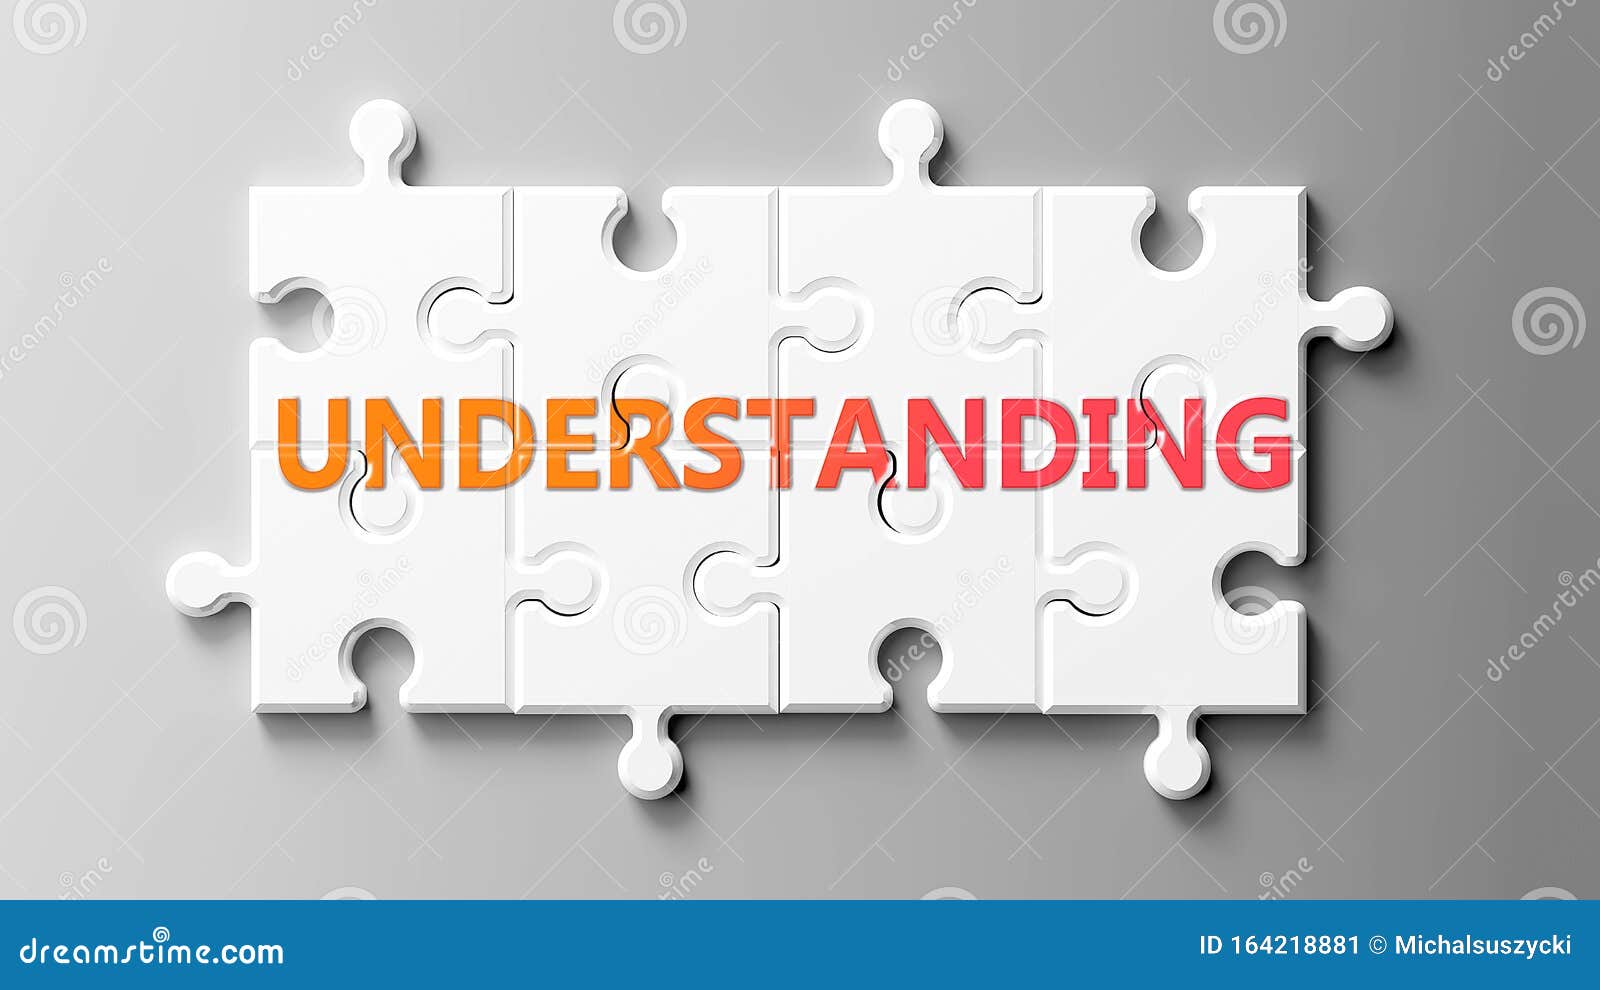 understanding complex like a puzzle - pictured as word understanding on a puzzle pieces to show that understanding can be